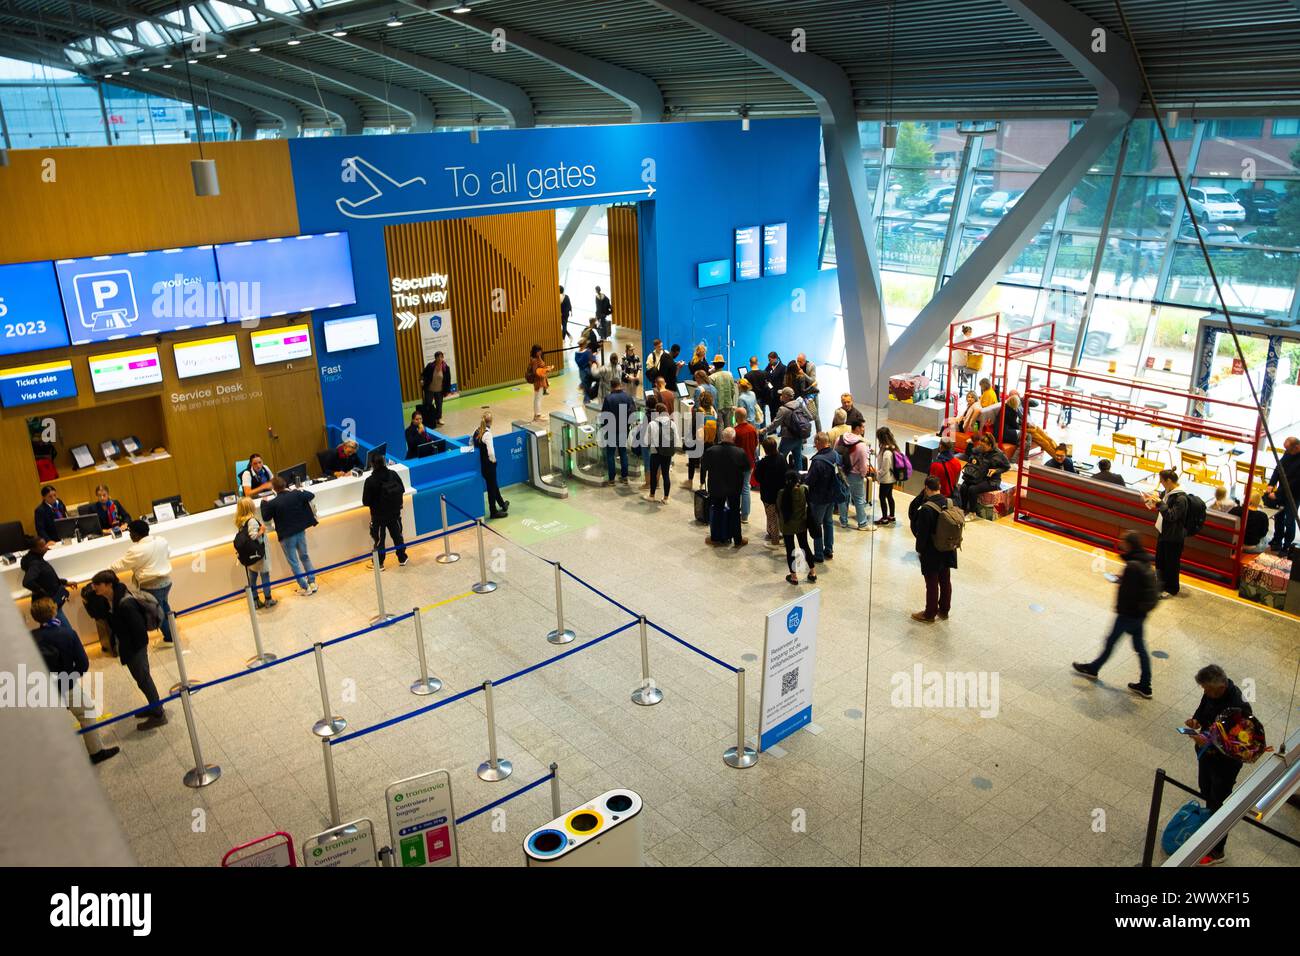 Entrance to gates at Eindhoven Airport Netherlands Passenger Terminal Stock Photo